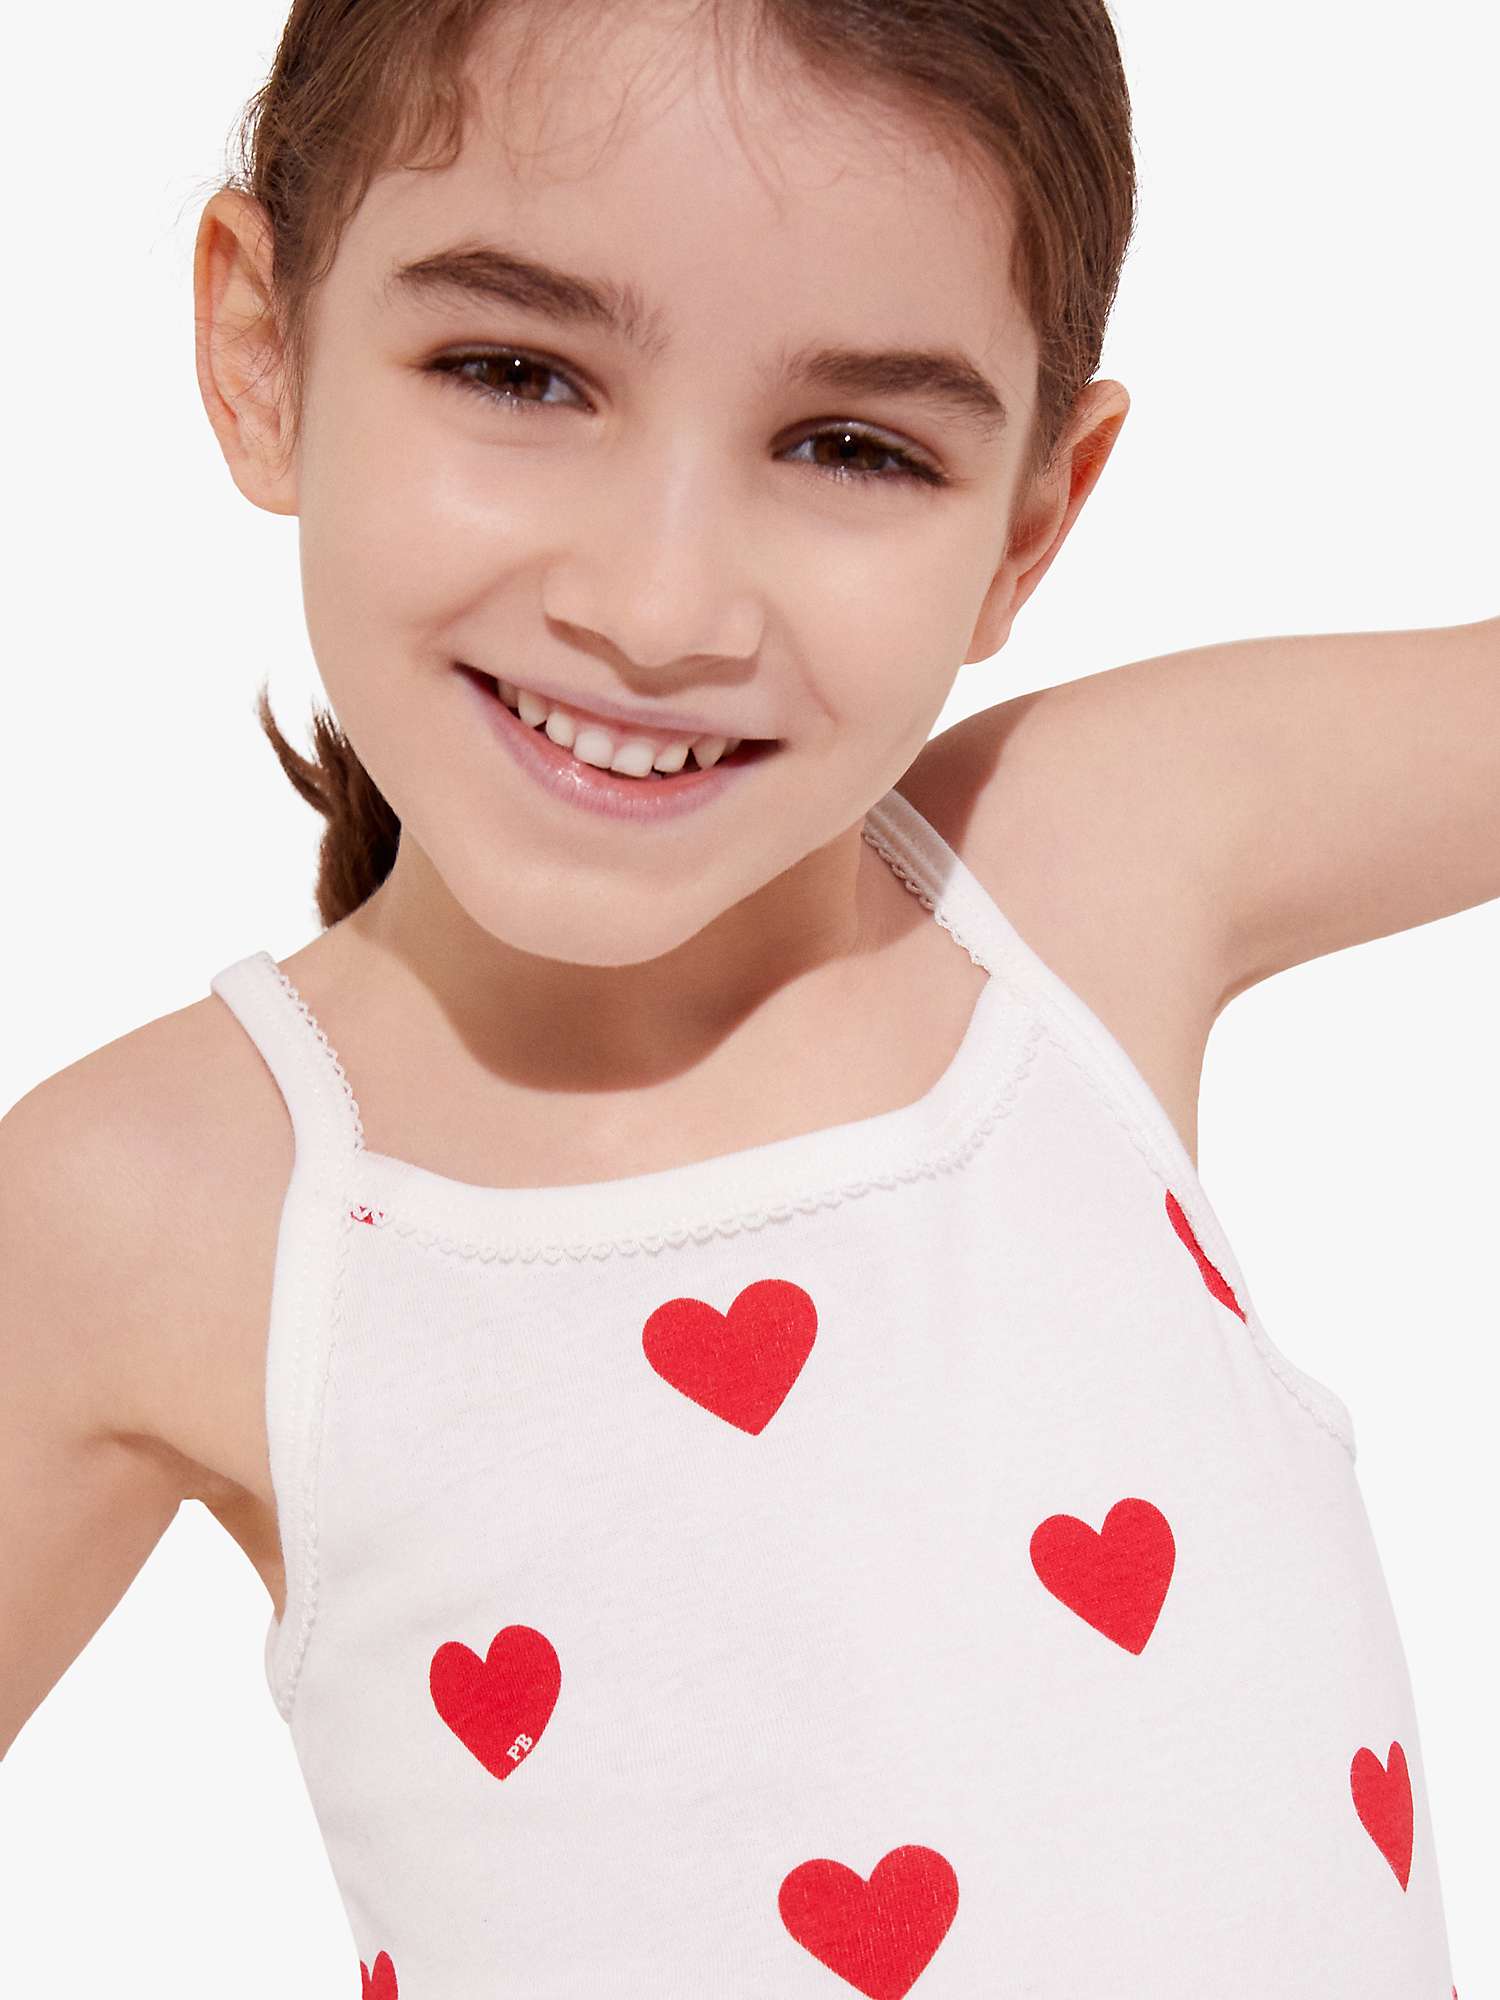 Buy Petit Bateau Kids' Heart Print Cotton Vests, Pack of 2, White/Red Online at johnlewis.com